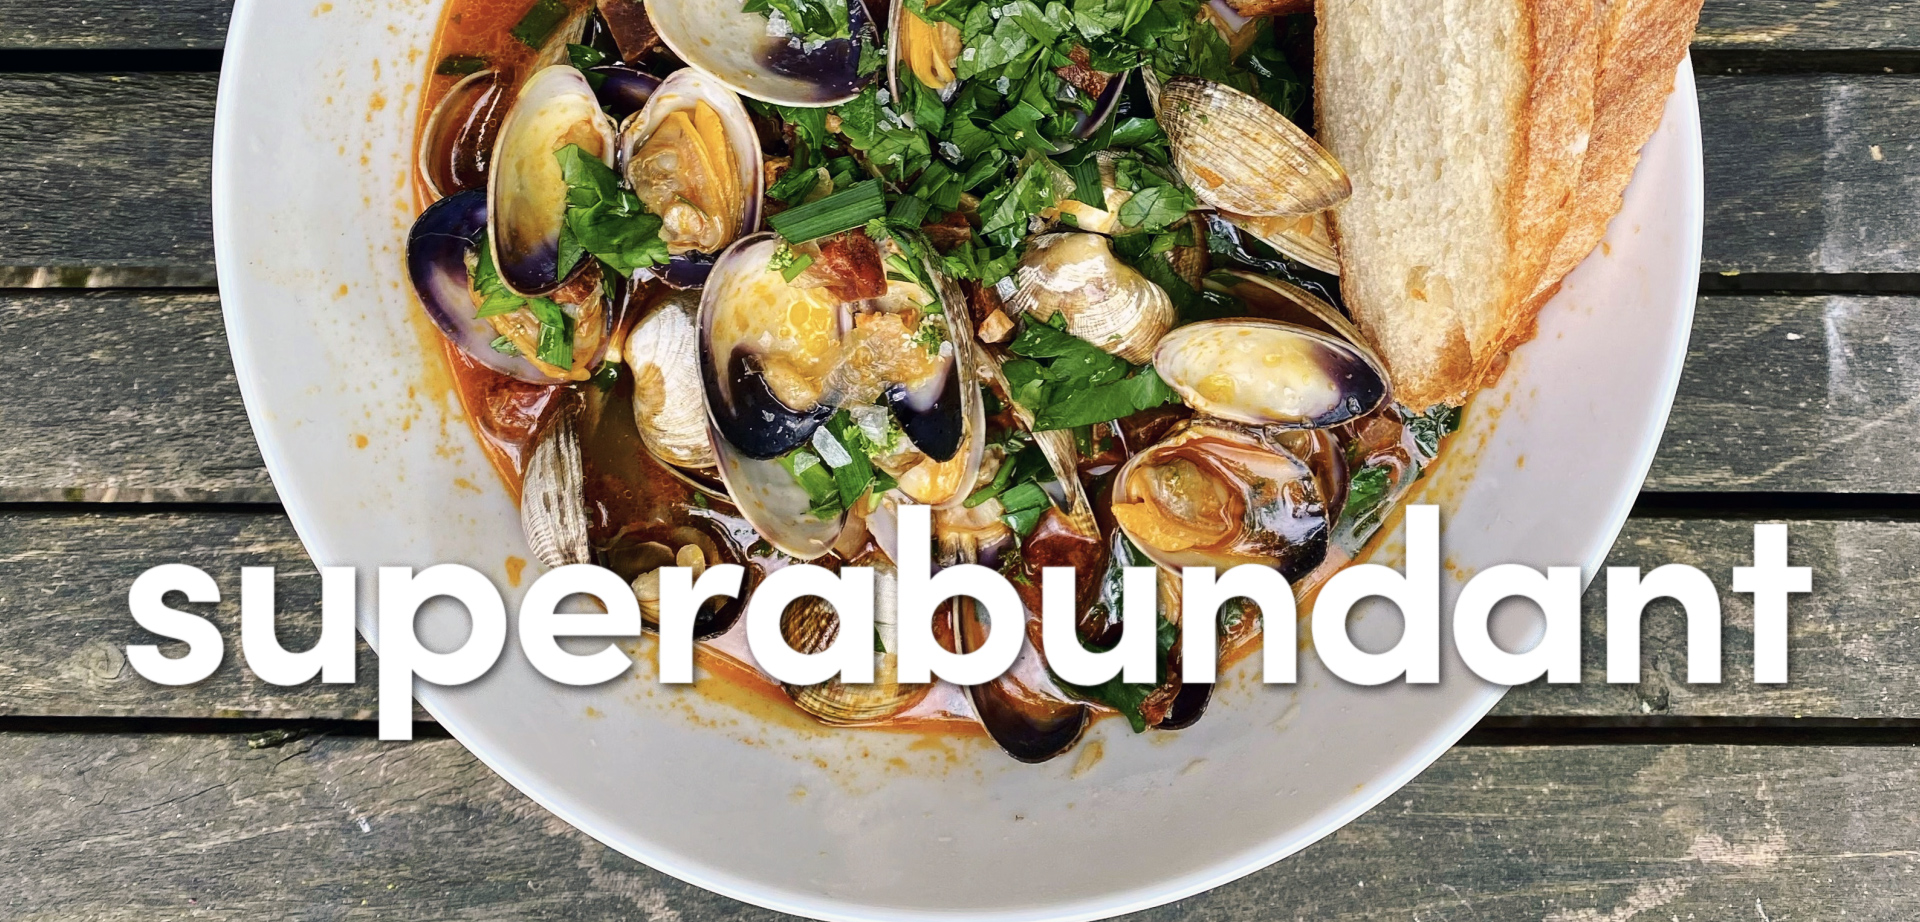 A bowl of clams in broth with chopped herbs and bread